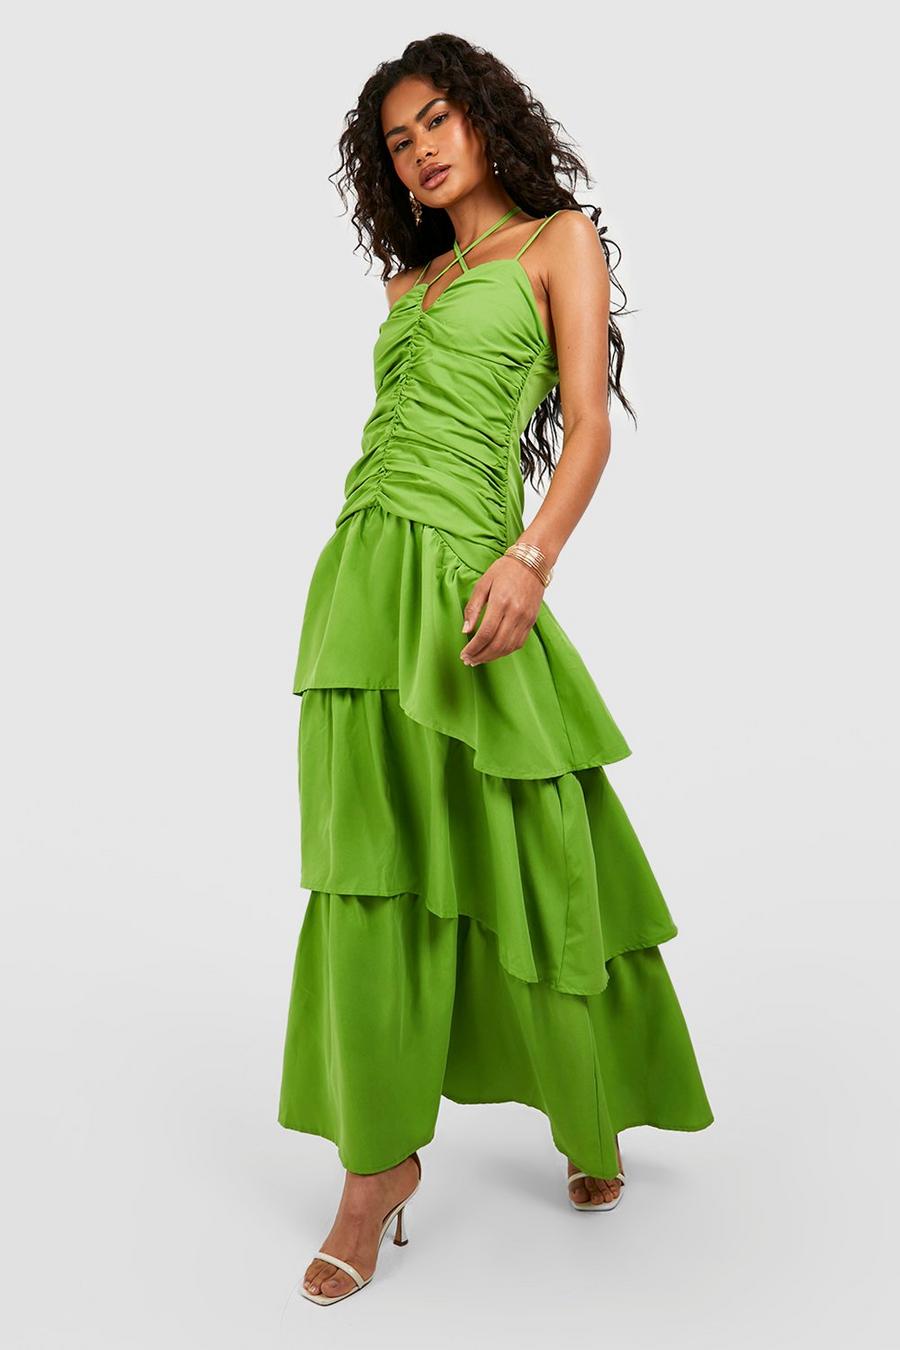 Bright green Ruched Bodice Frill Skirt Maxi Dress